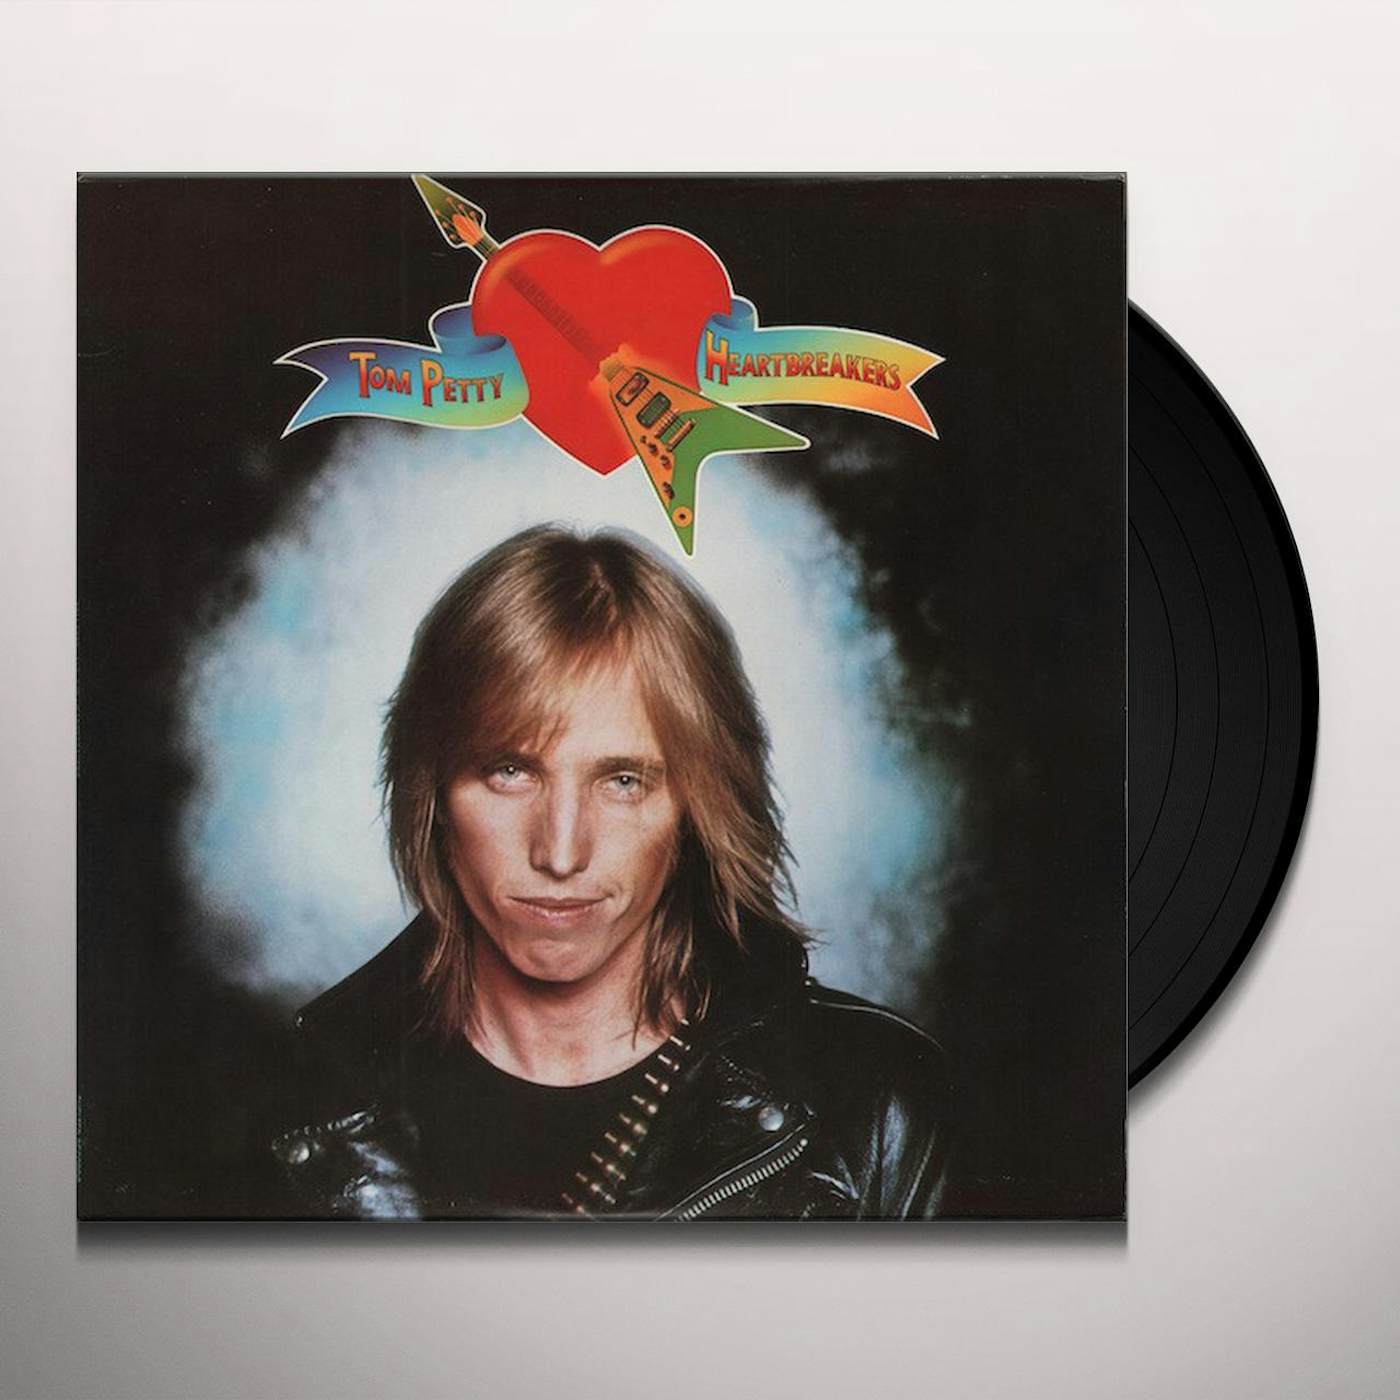 Tom Petty and the Heartbreakers Vinyl Record